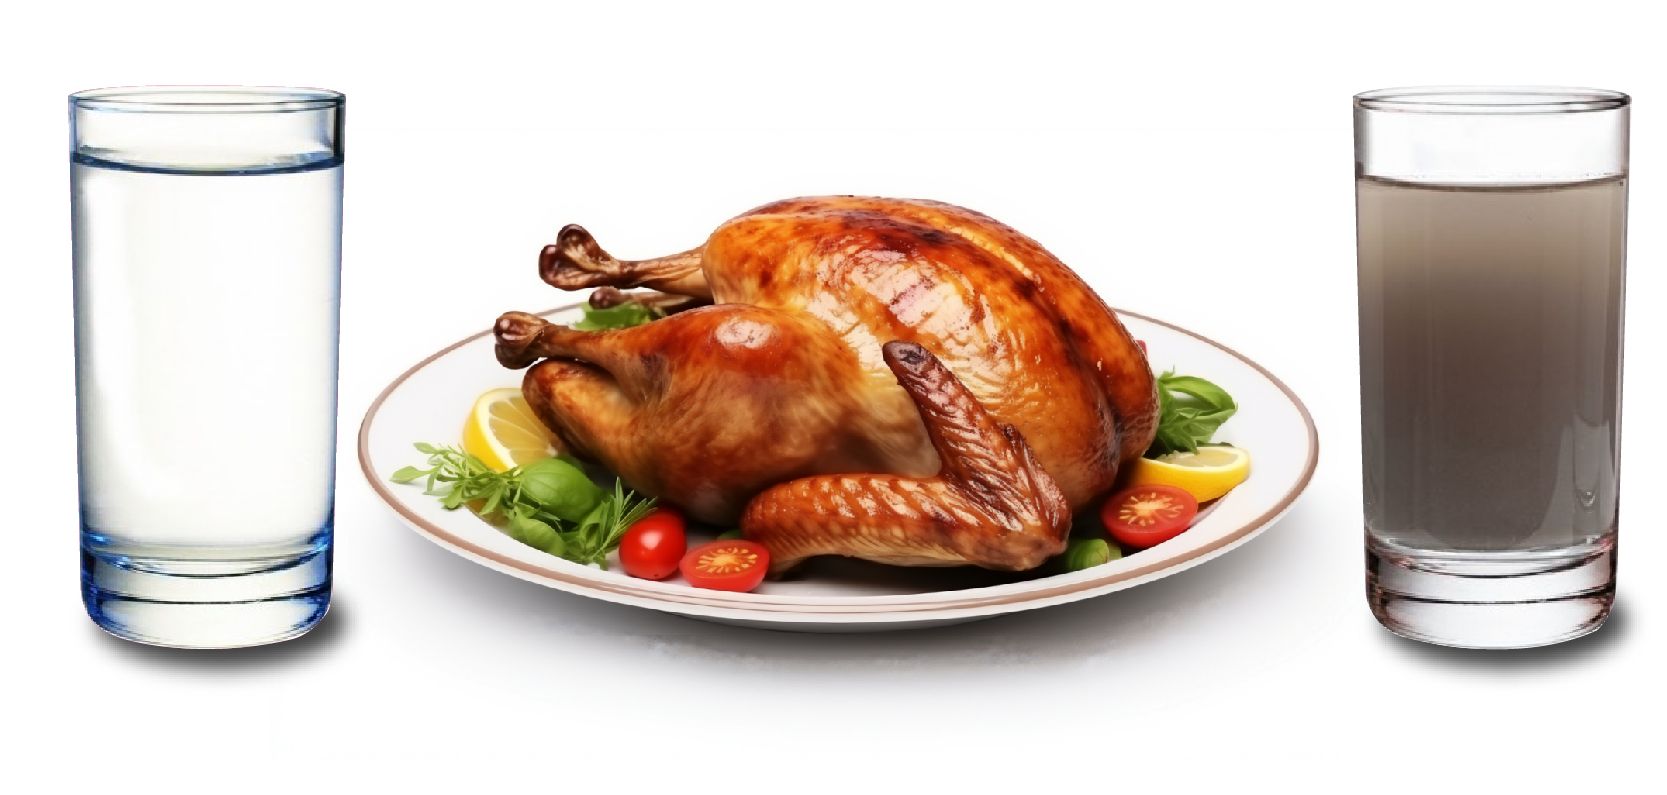 Image of a turkey with clean and dirty water glasses